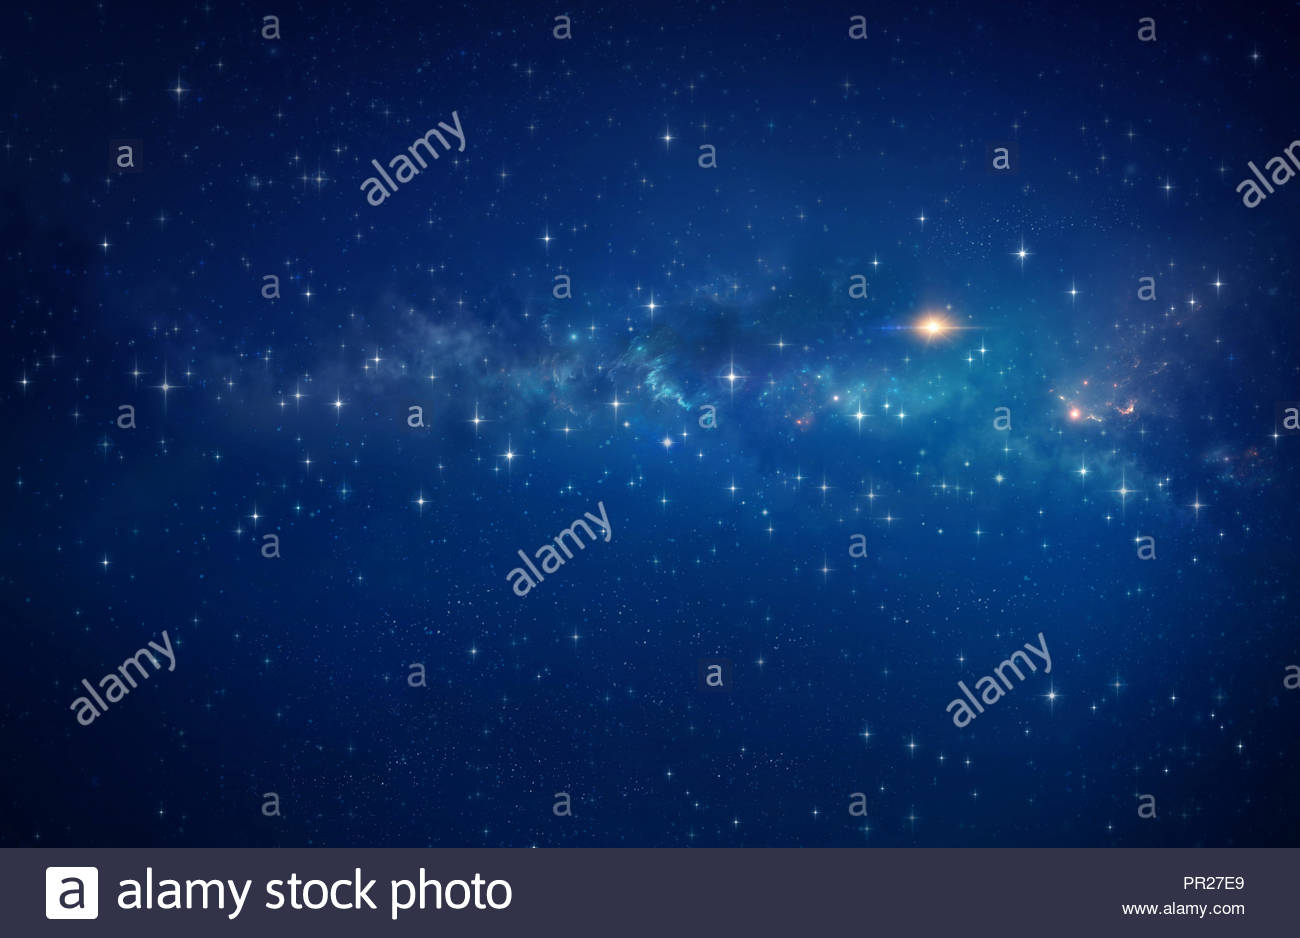 Galaxy And Star Clusters In Deep Space High Definition Galactic